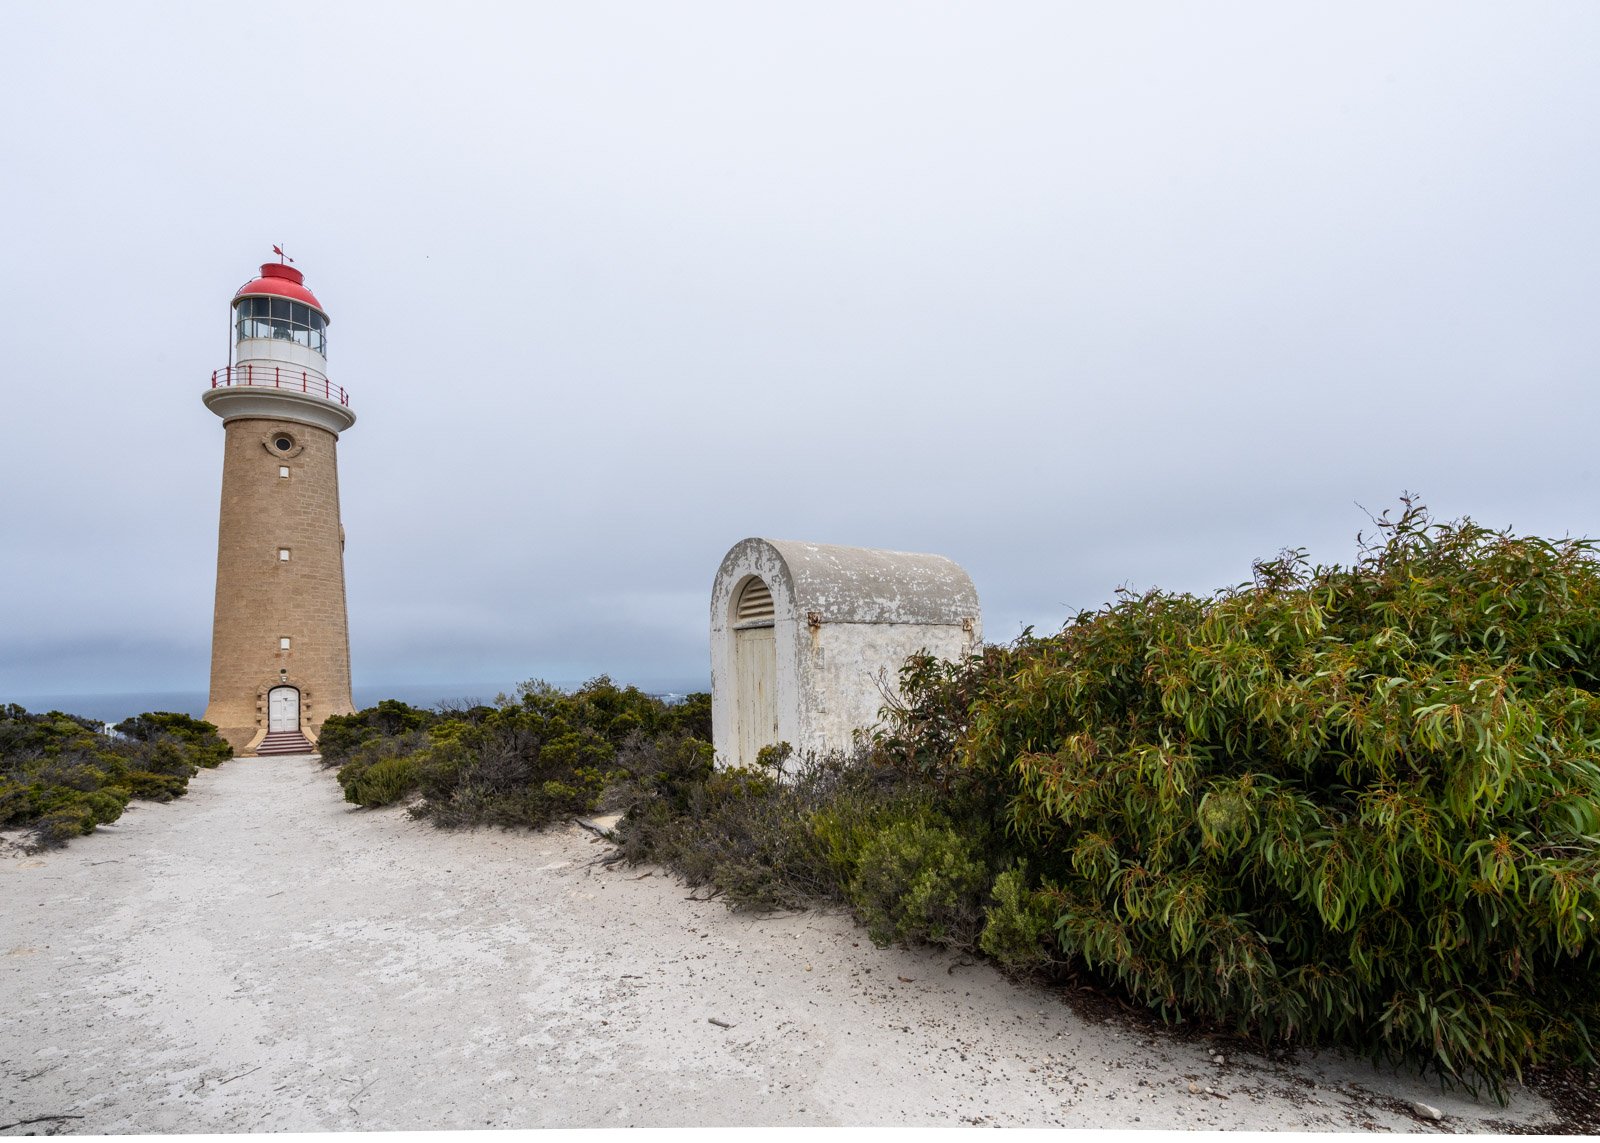 Cape de Couedic Lighthouse under gray skies